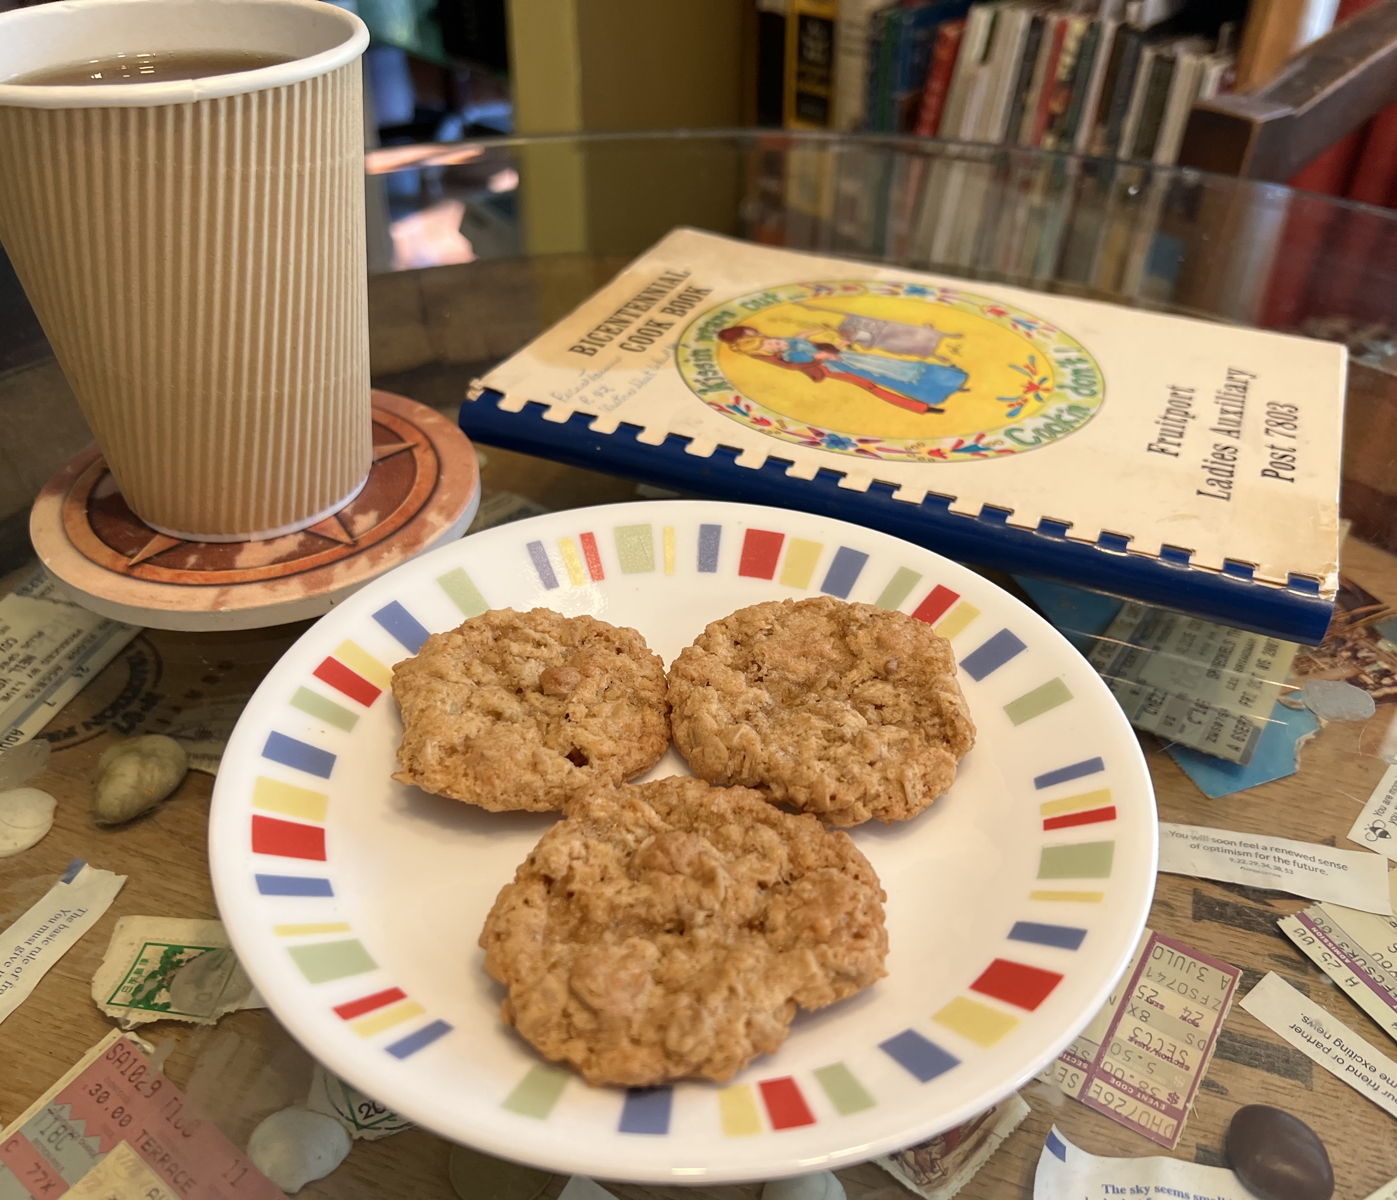 Fruitport coconut oatmeal cookies: Coconut oatmeal cookies by Phyllis Loughmiller, from the 1976 Fruitport Bicentennial Cook Book.; cookies; oatmeal; coconut; Fruitport, Michigan